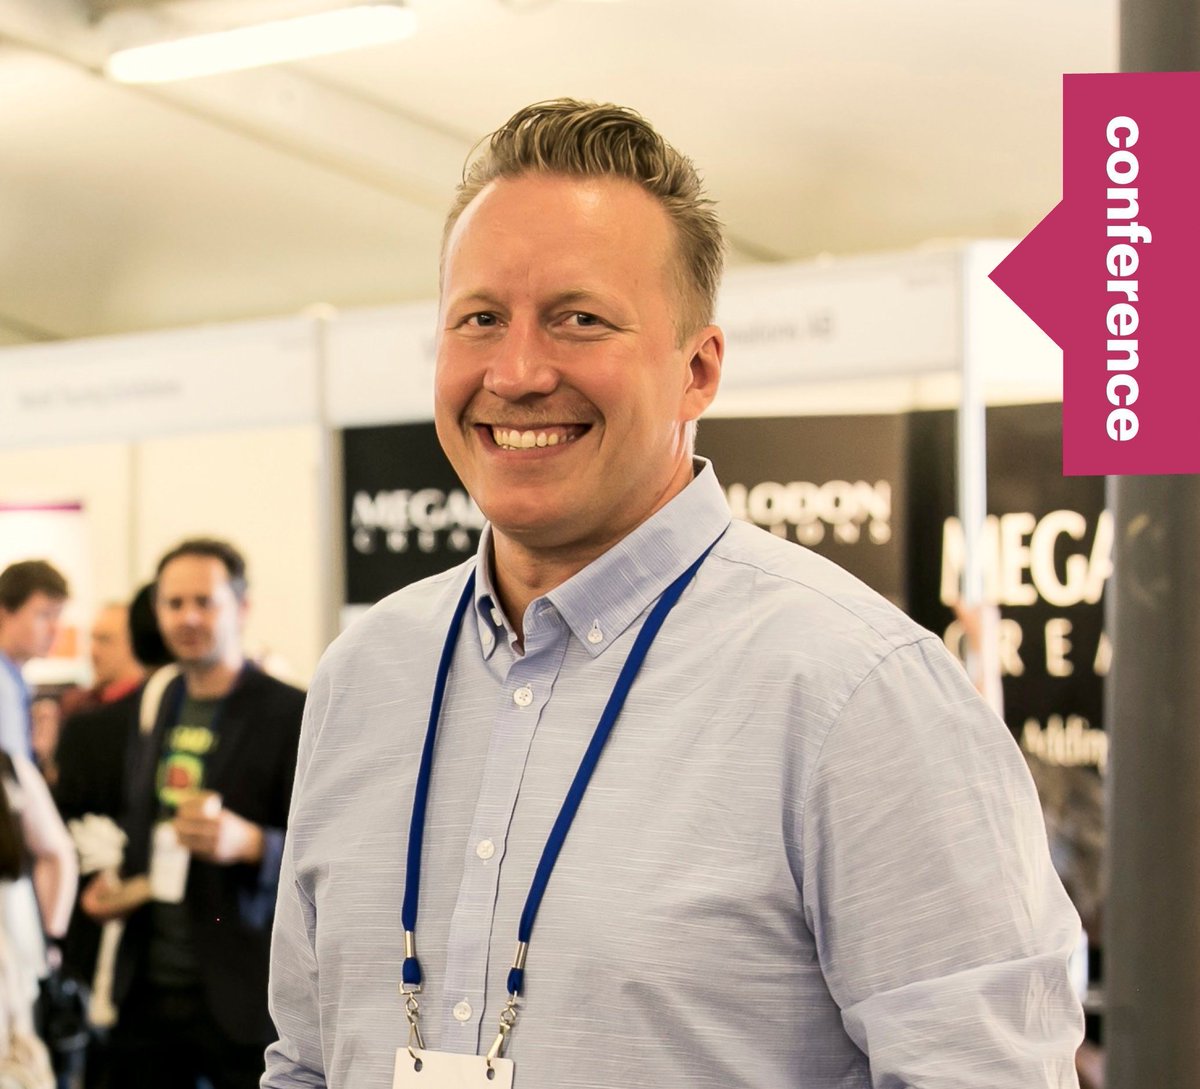 Get to know more about #Ecsite2024 sponsor @ExpoBooking and why they chose to participate in the event. Discover their interview 👉 buff.ly/4bOO6l1 #Ecsite #scicomm #innovation